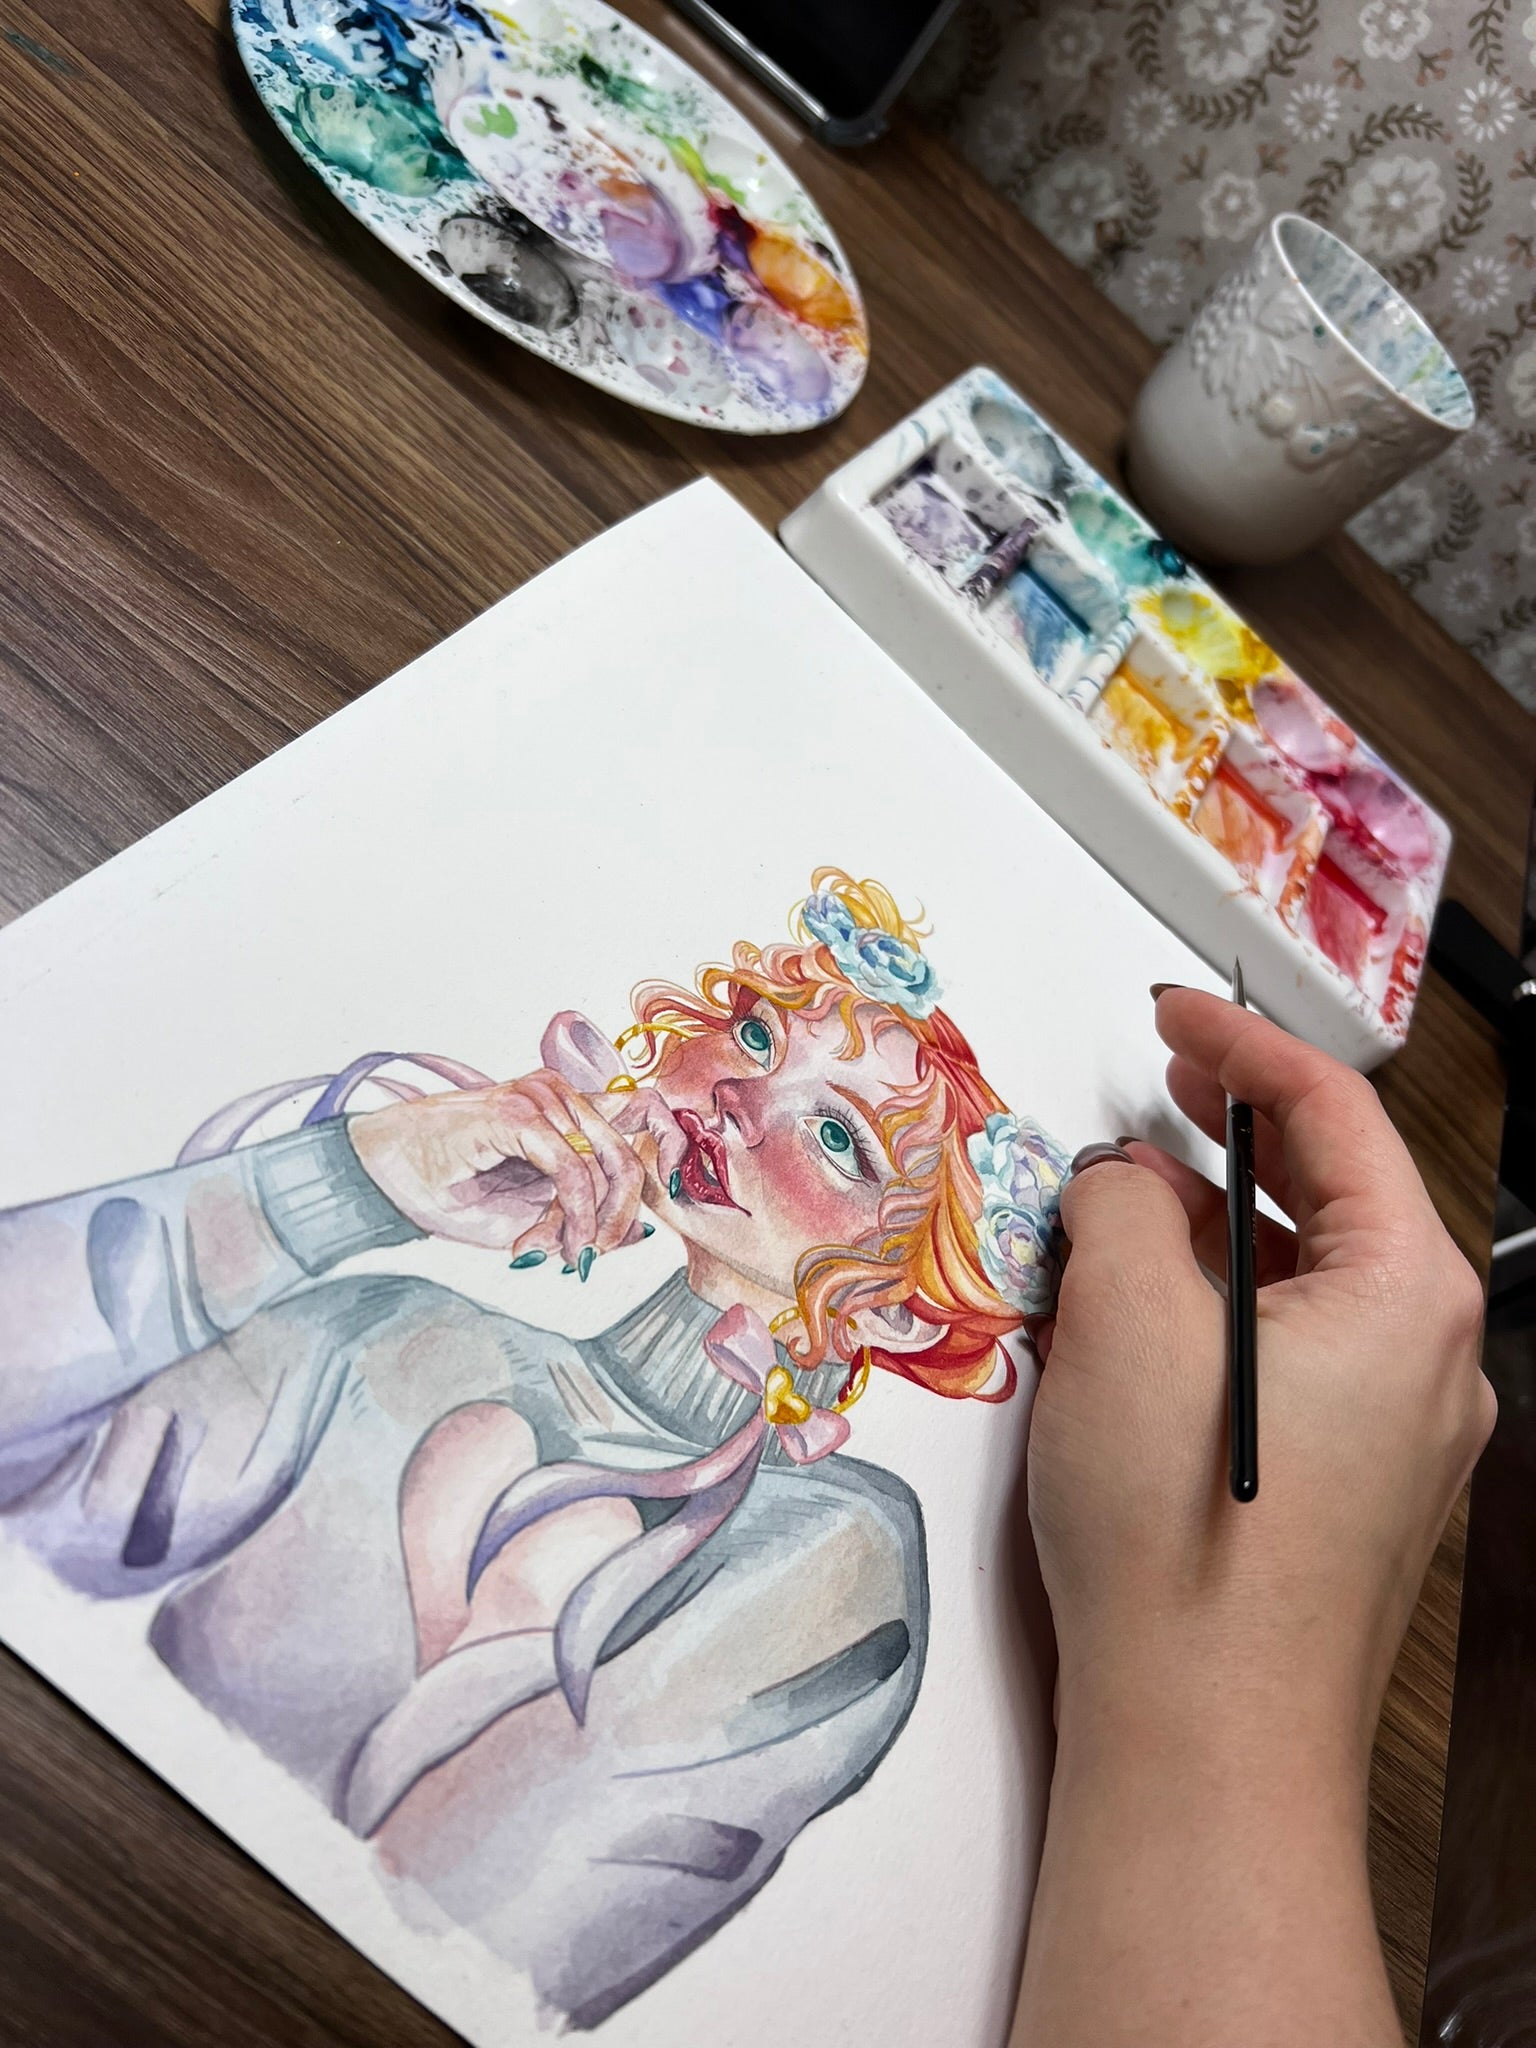 Photo of a watercolor painting work in progress. The artist is holding the paintbrush off to the side and you can see the pallets covered in paint and the glass for cleaning the brush.